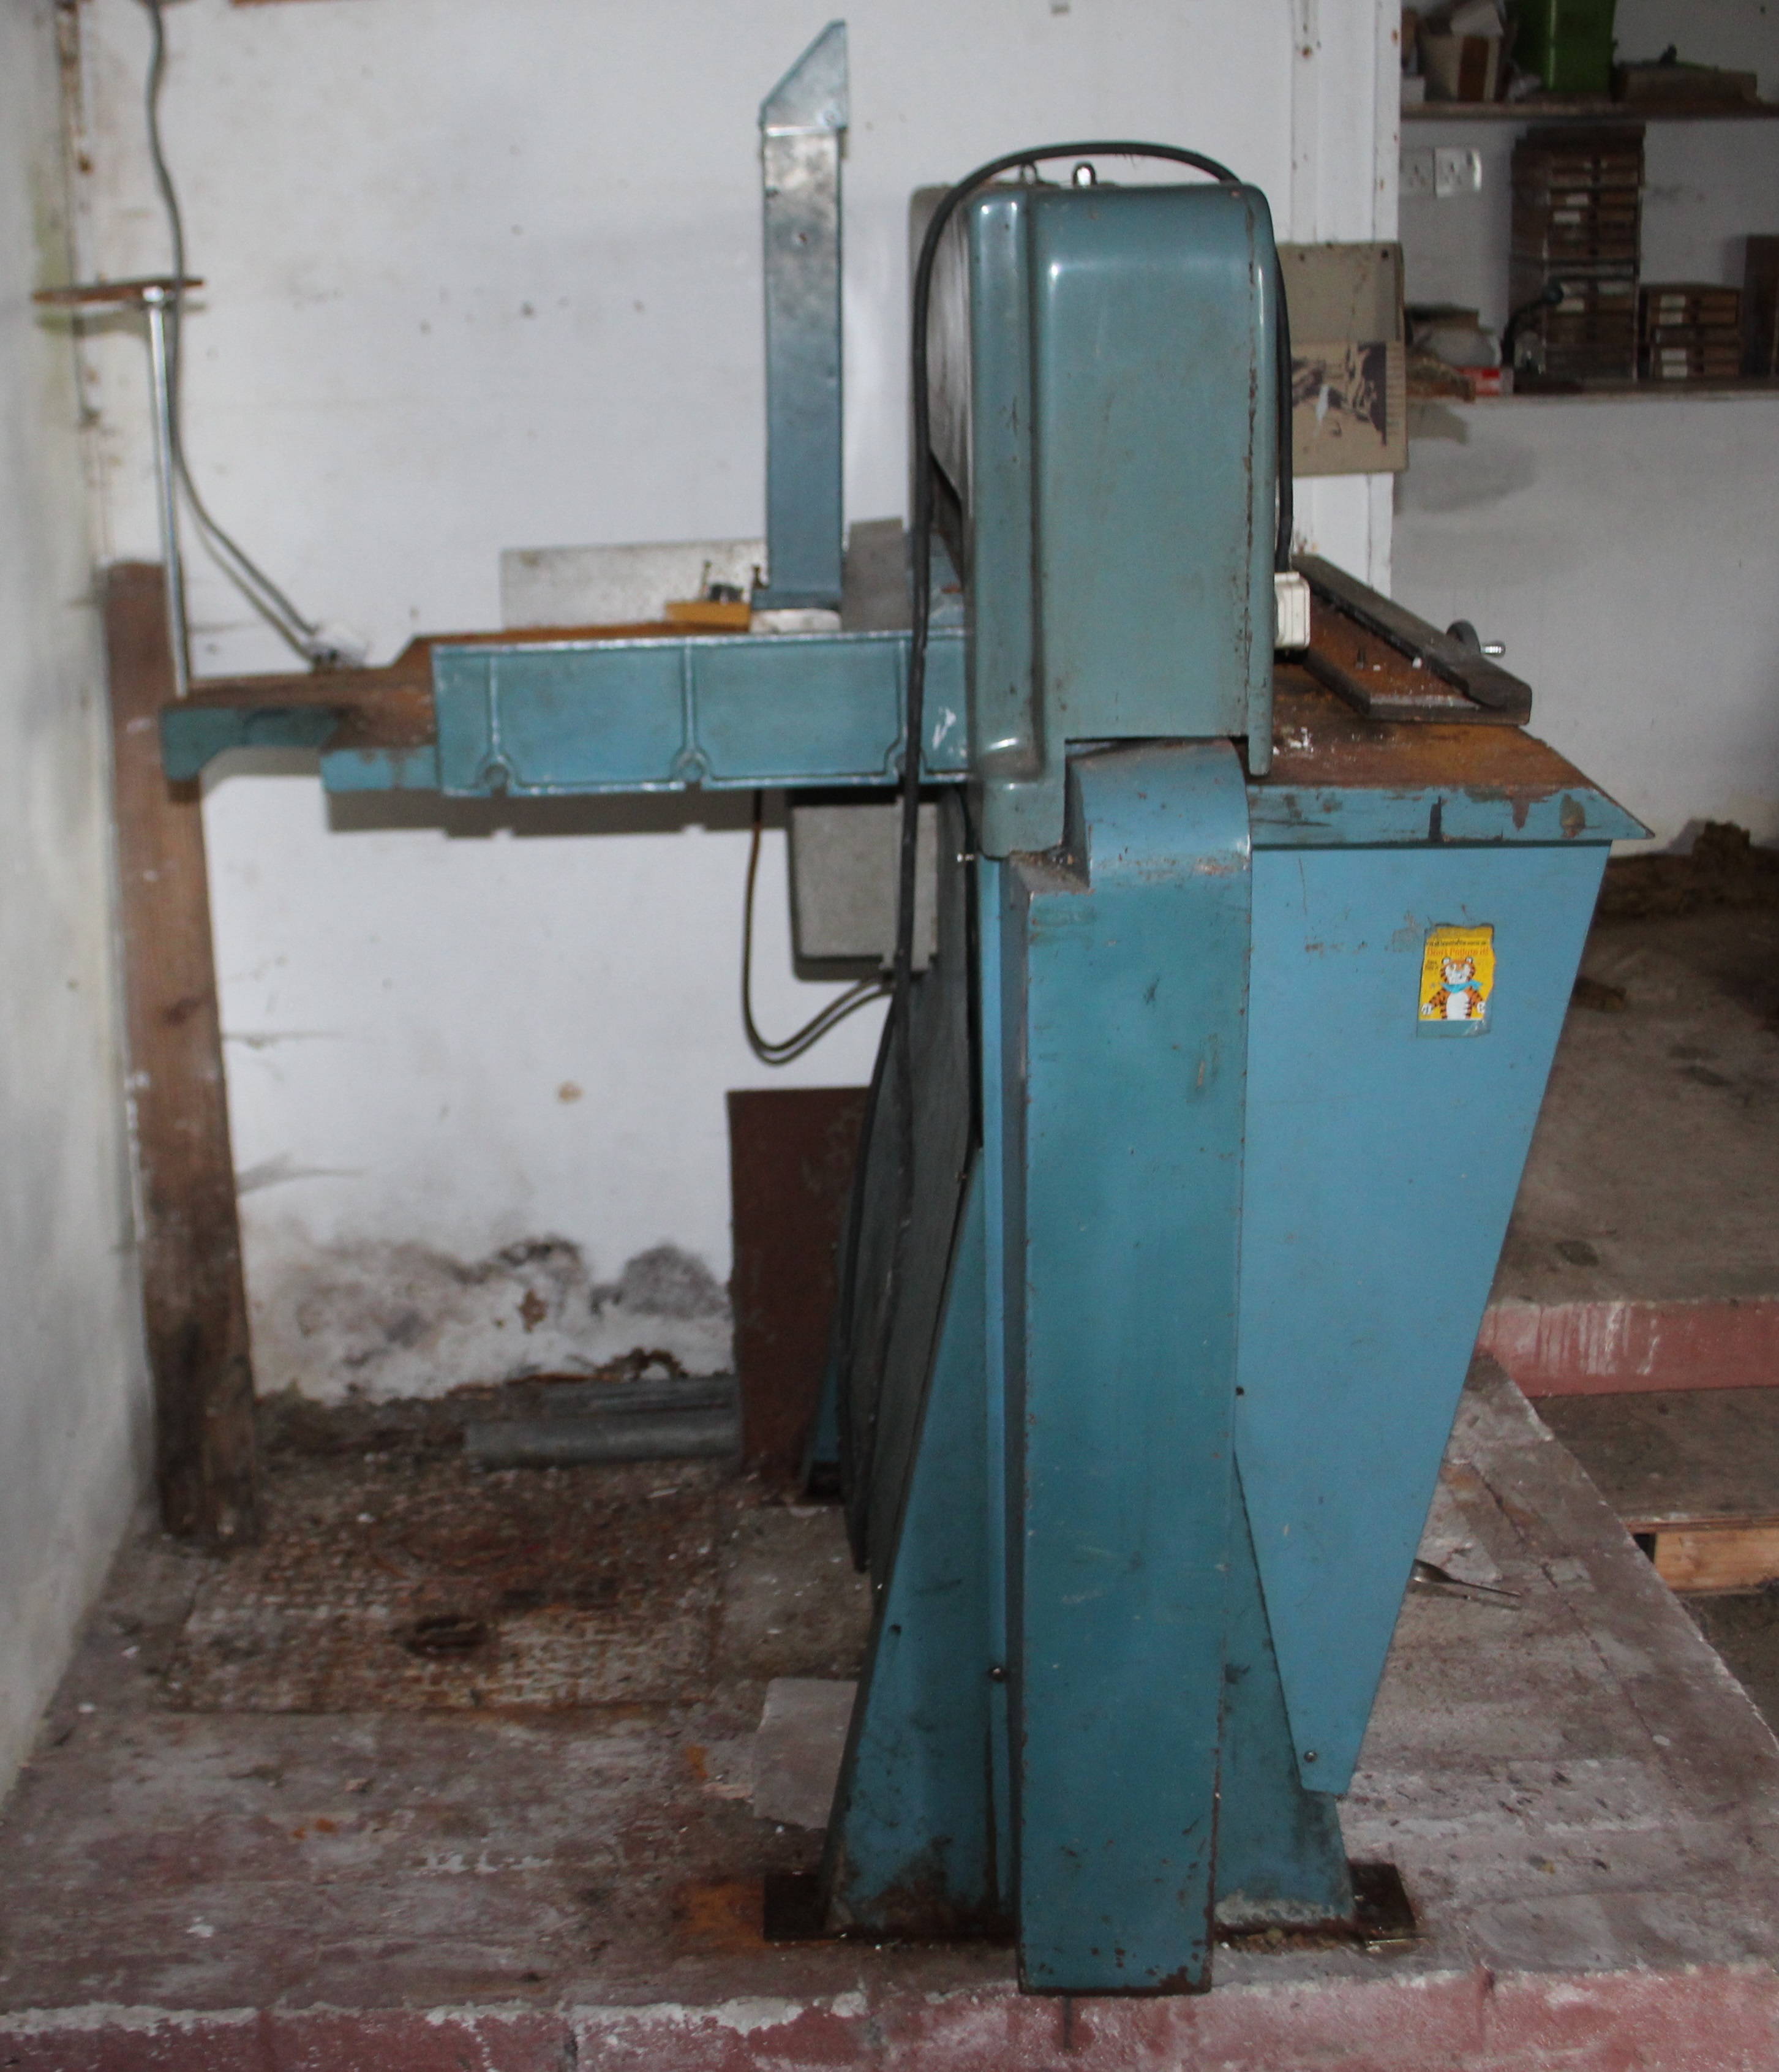 Brook Powercut 20 inch paper cutting machine formerly used by The Rapid Printing Service, - Image 2 of 4